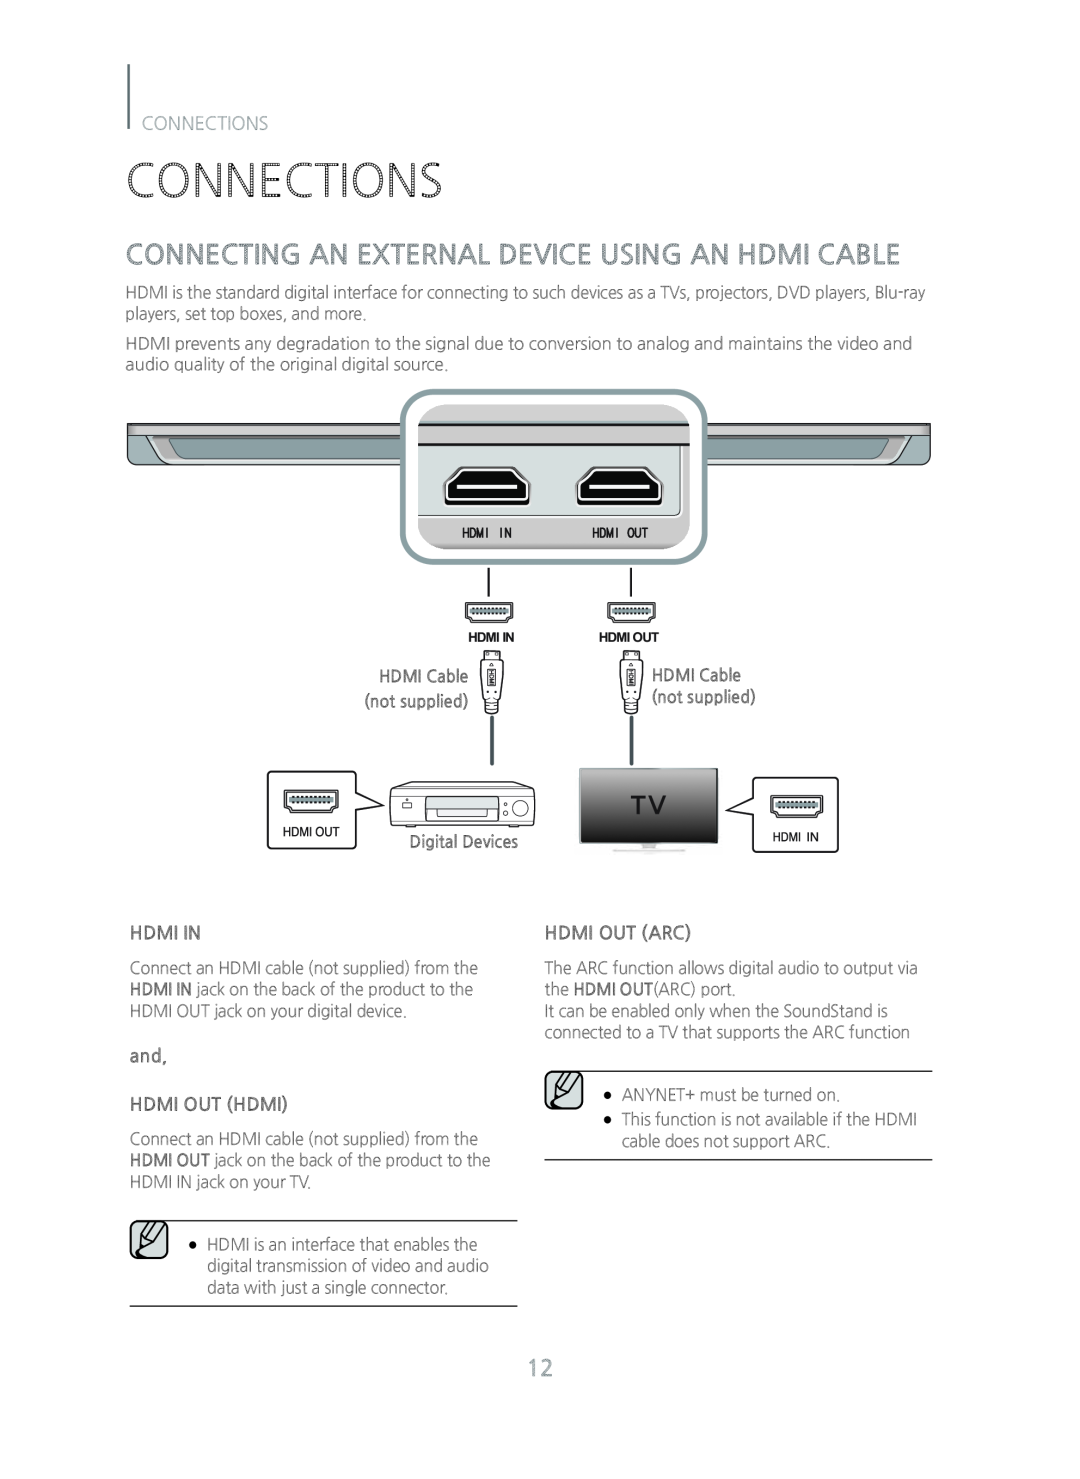 Samsung HW-H600/ZA manual Connections, Connecting An External Device Using An Hdmi Cable, Hdmi In, Hdmi Out Arc, HDMI Cable 